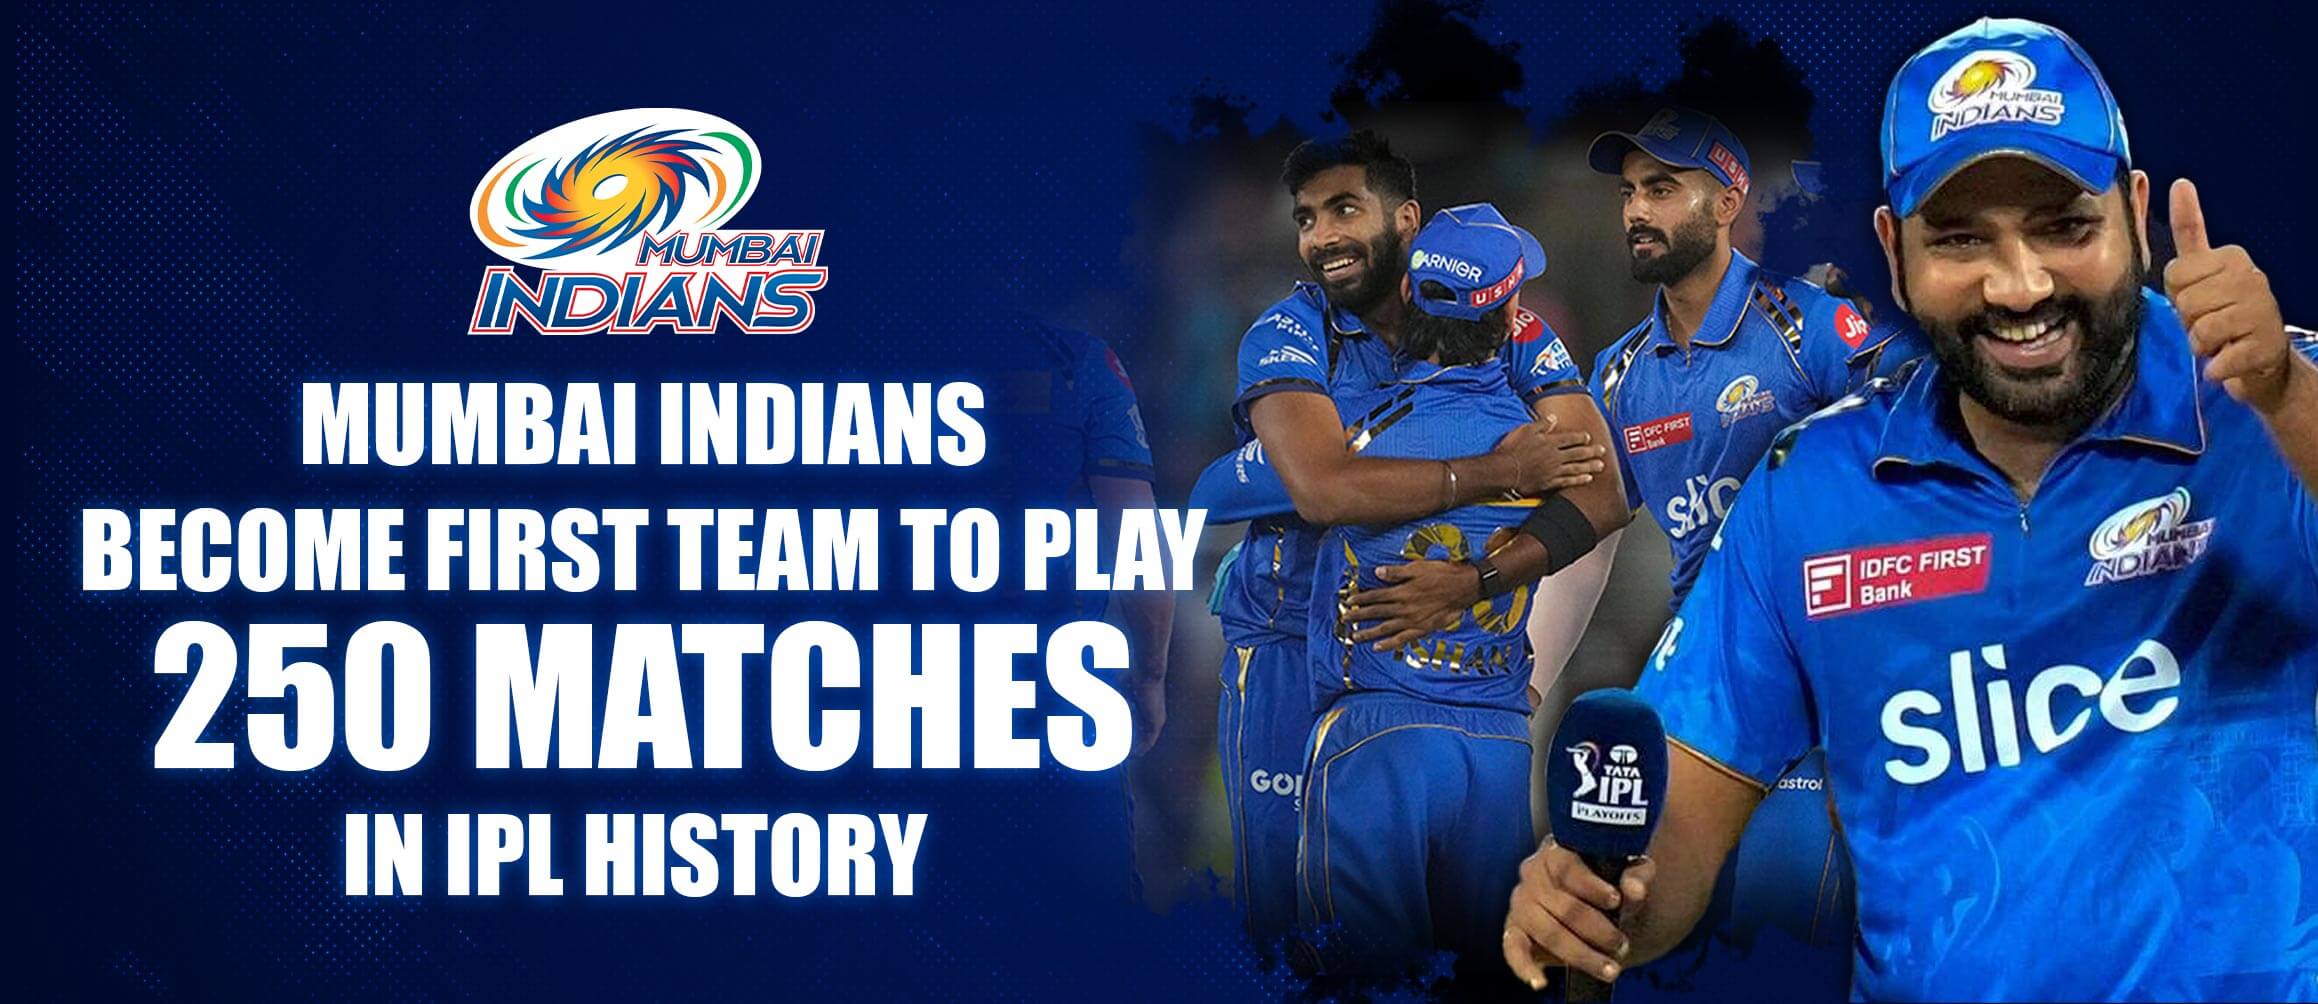 Mumbai Indians Become First Team to Play 250 Matches in IPL History